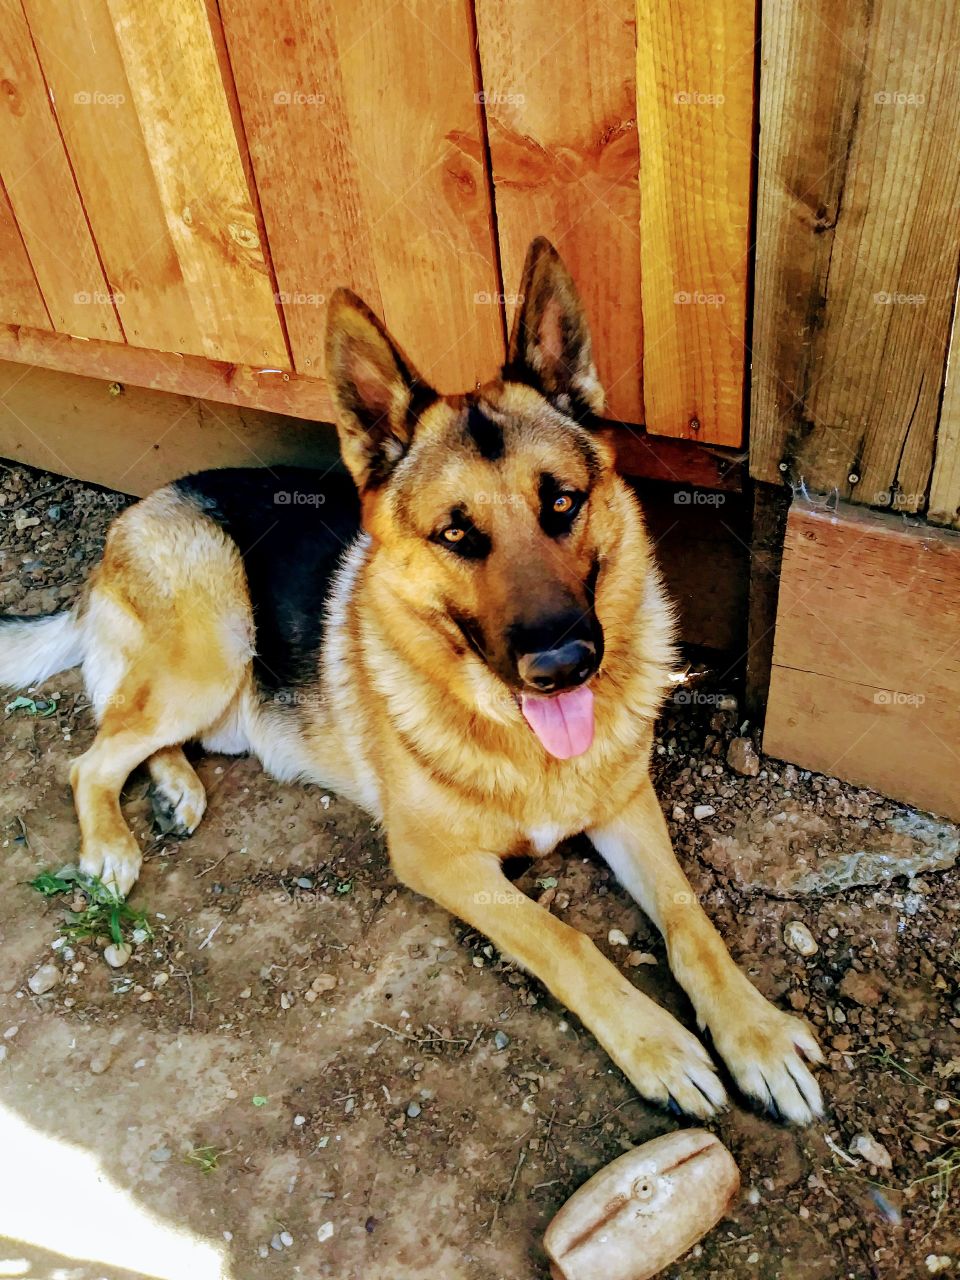 german shepherd laying near wooden fence with toy hotdog by his feet and his tongue hanging out